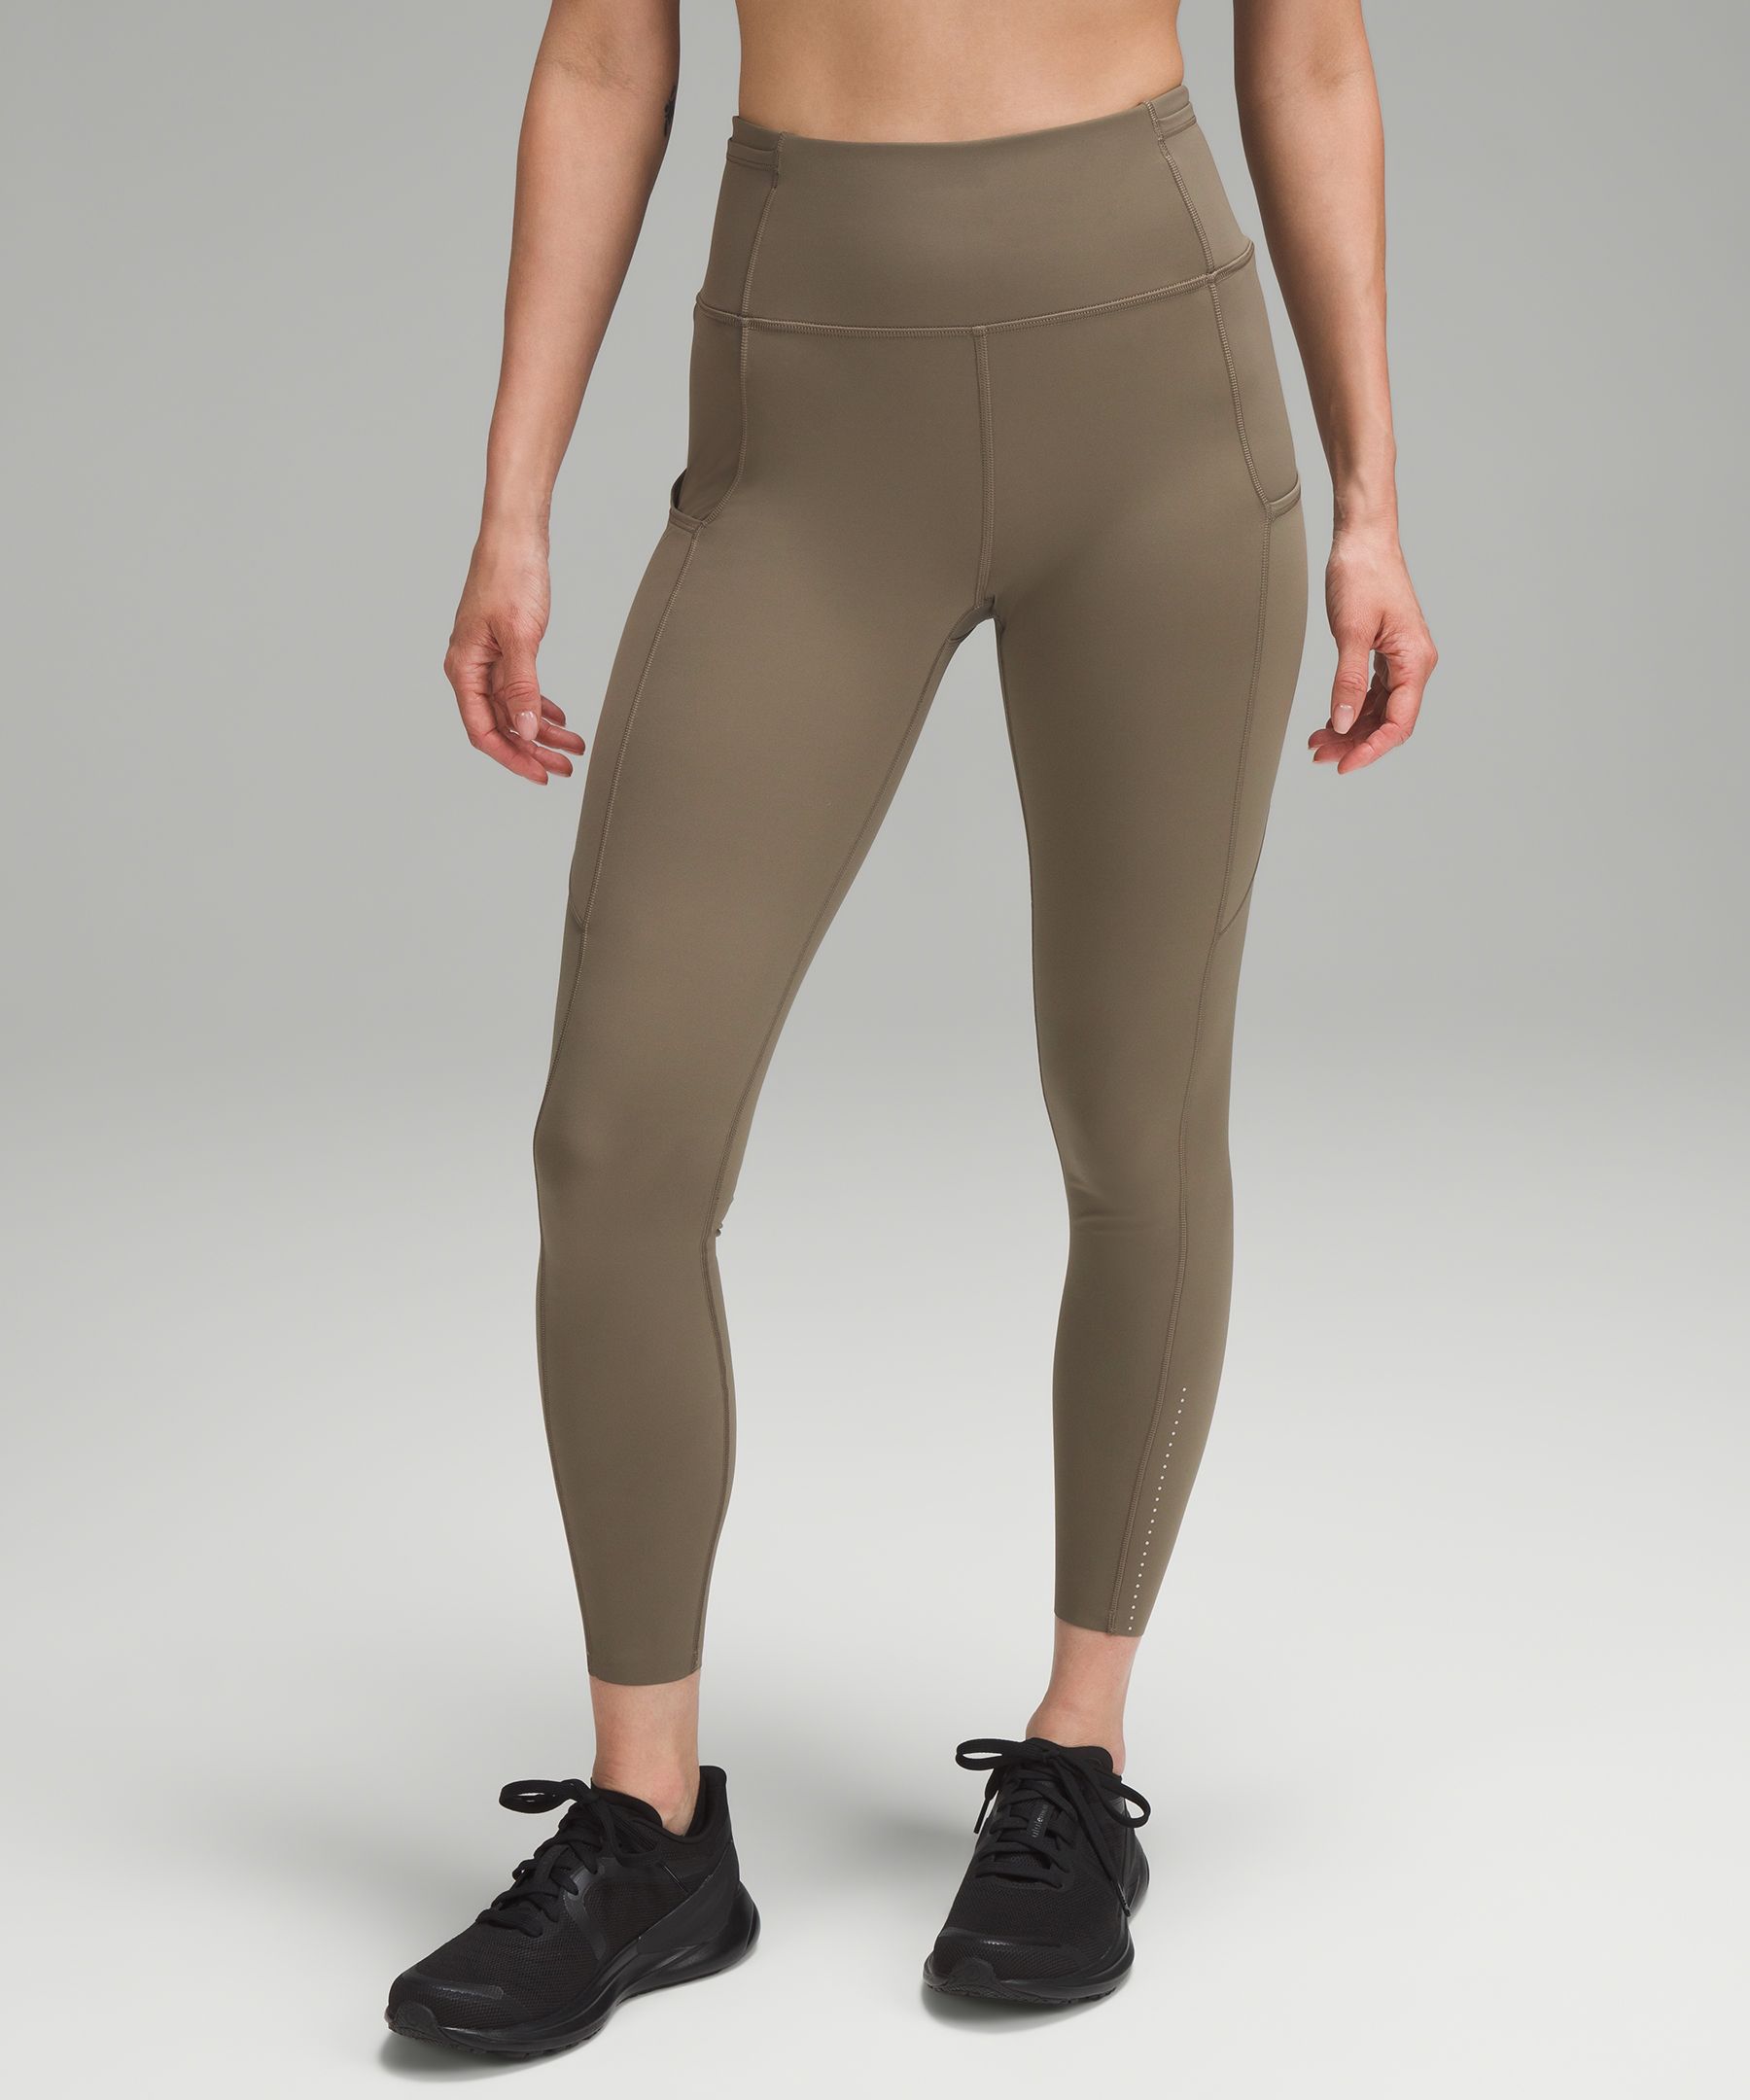 Fast and Free Reflective High-Rise Tight 24 *Asia Fit